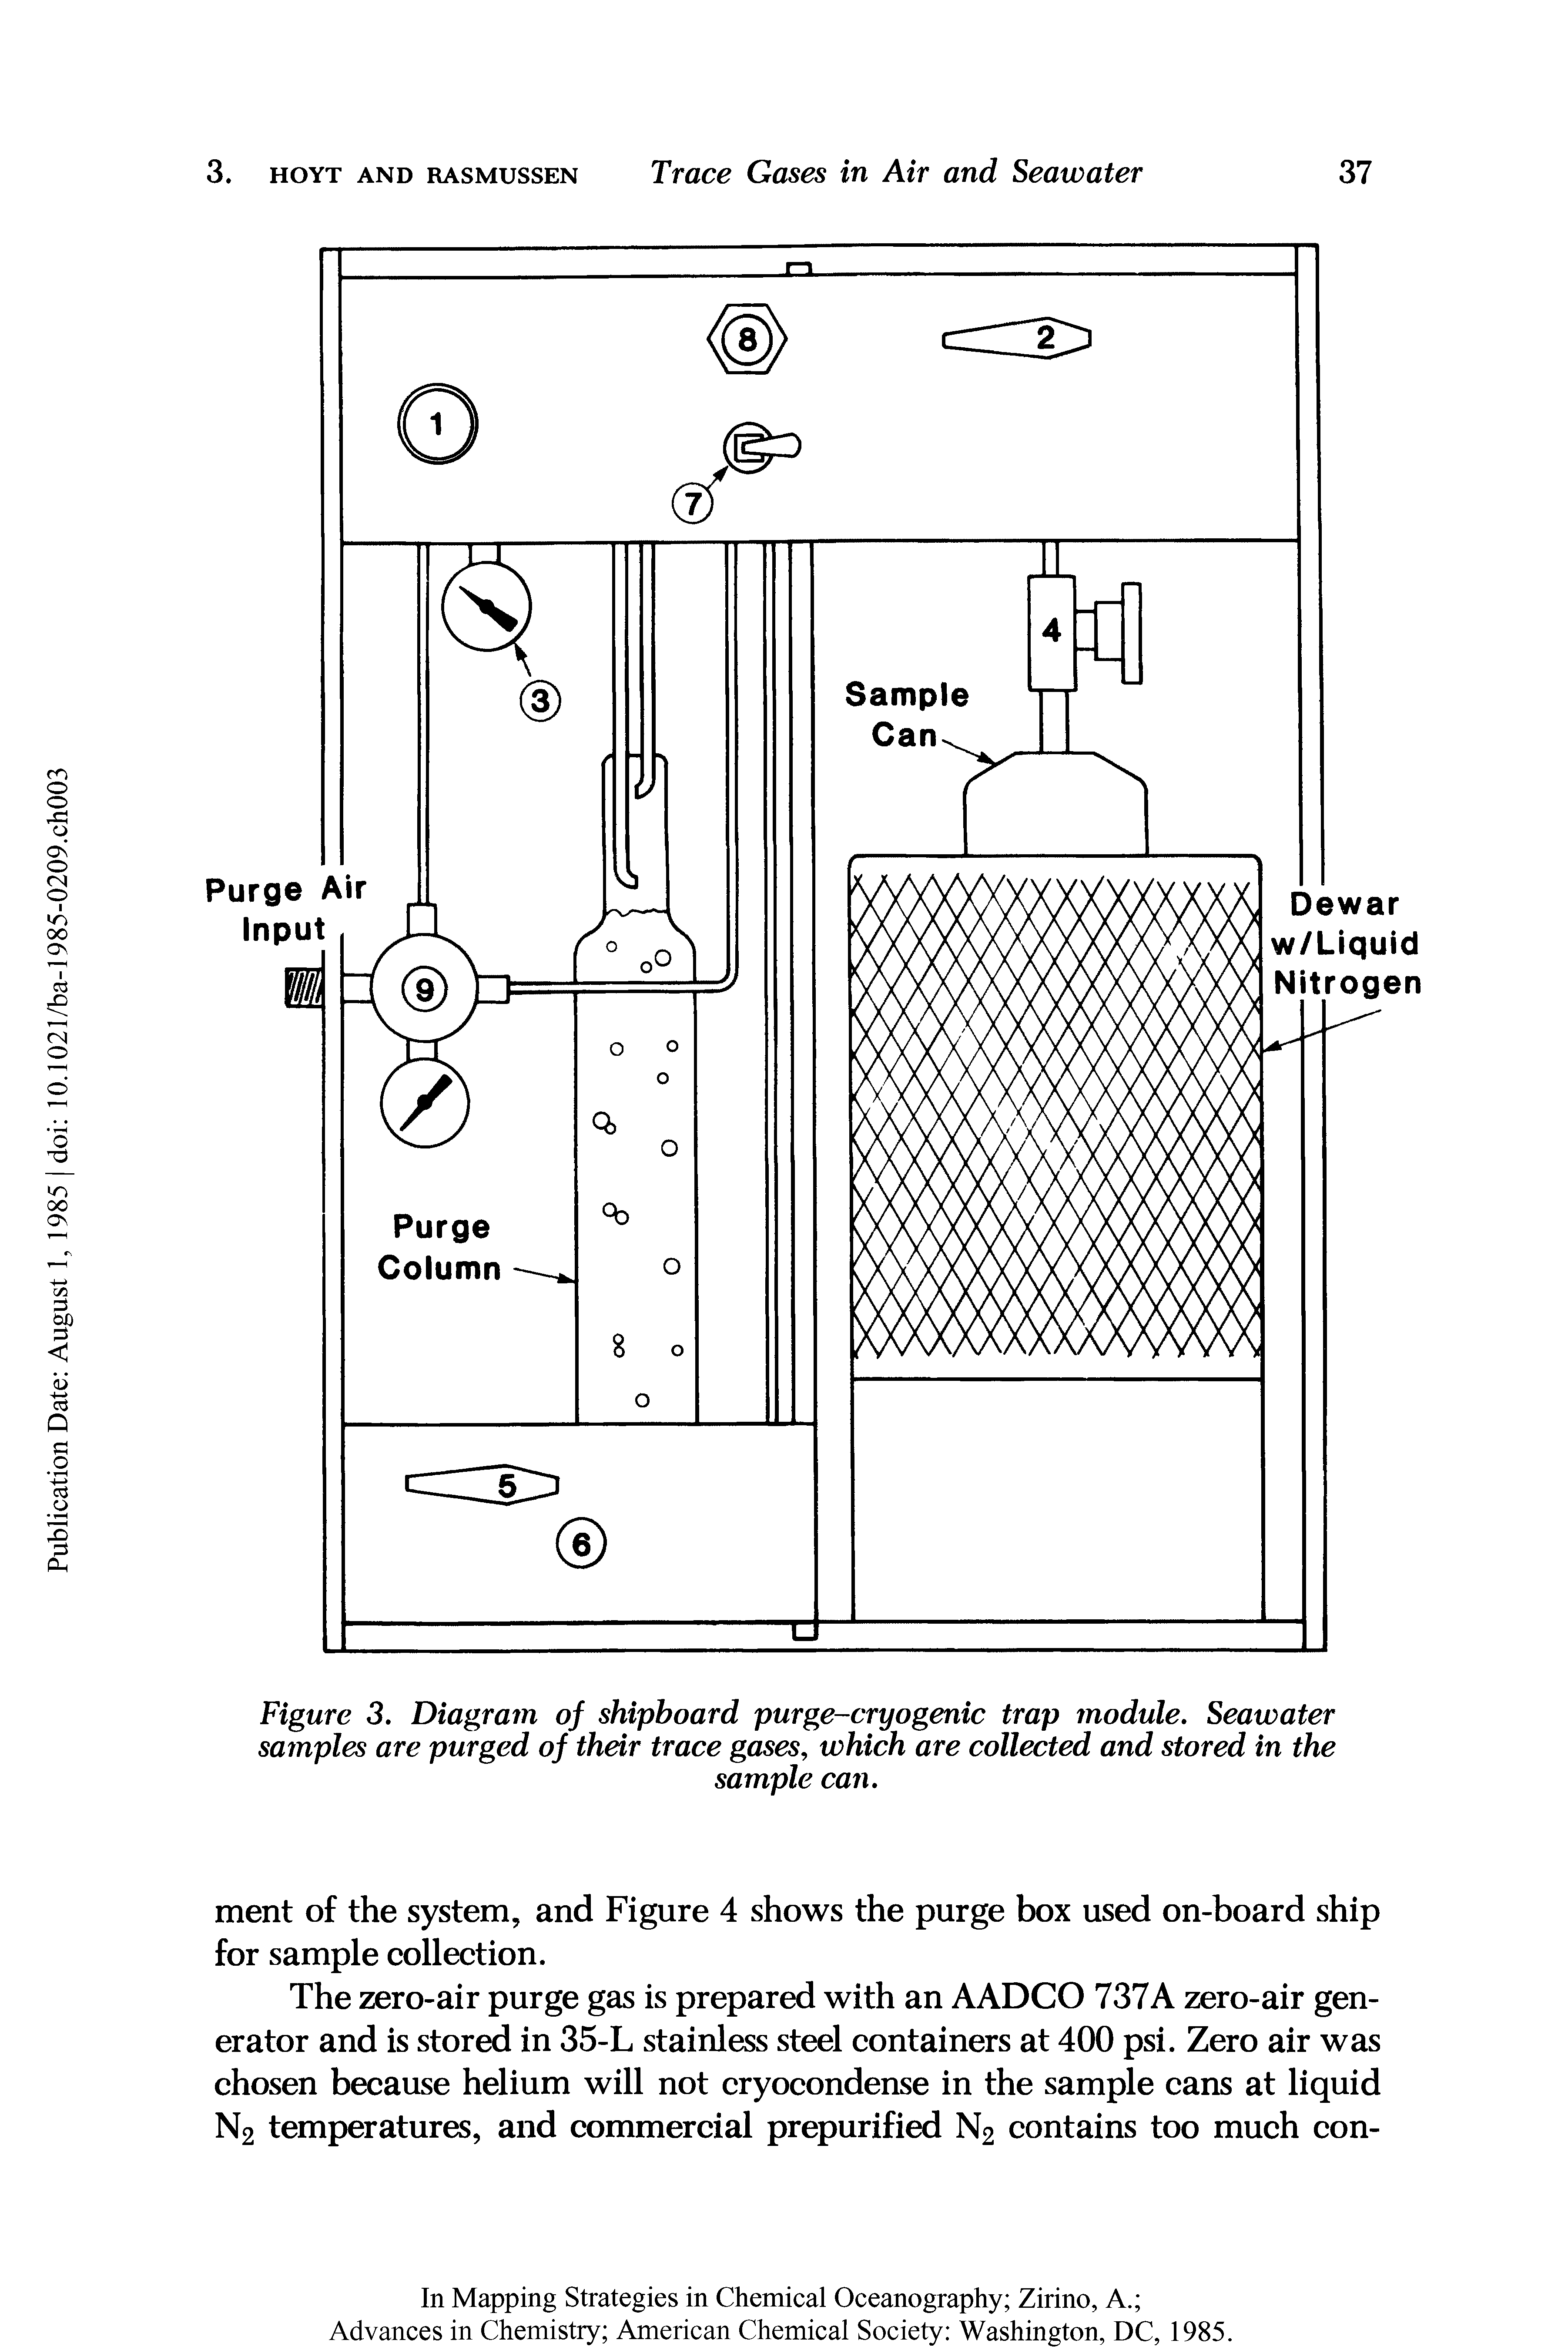 Figure 3. Diagram of shipboard purge-cryogenic trap module. Seawater samples are purged of their trace gases, which are collected and stored in the...